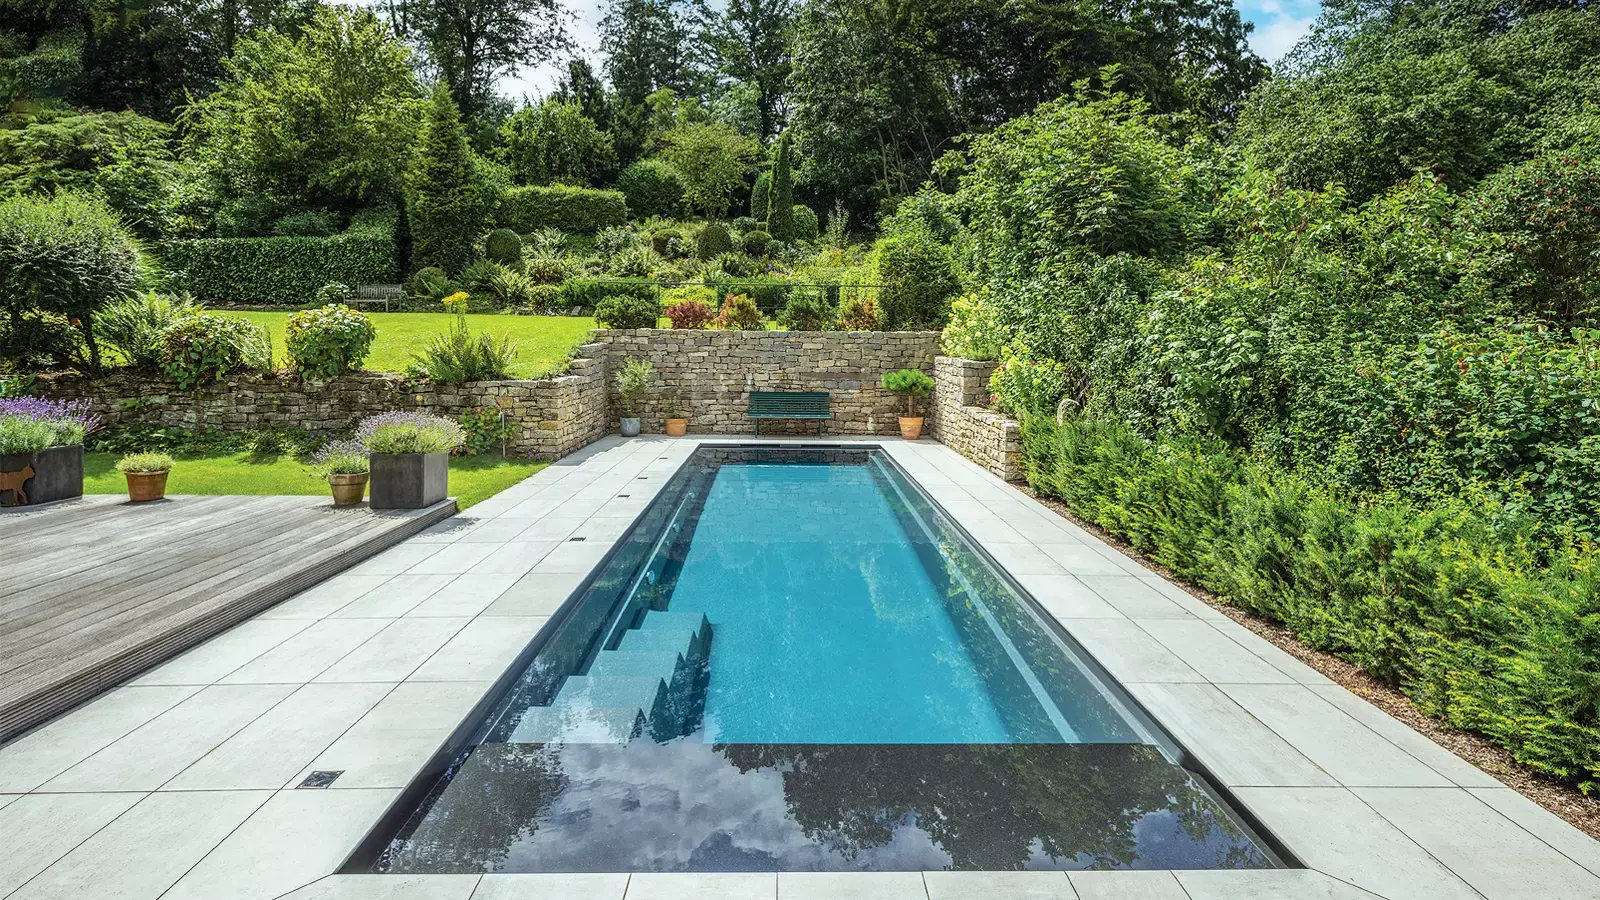 The Linear - High Waterline Flat Bottom Pool from Leisure Pools